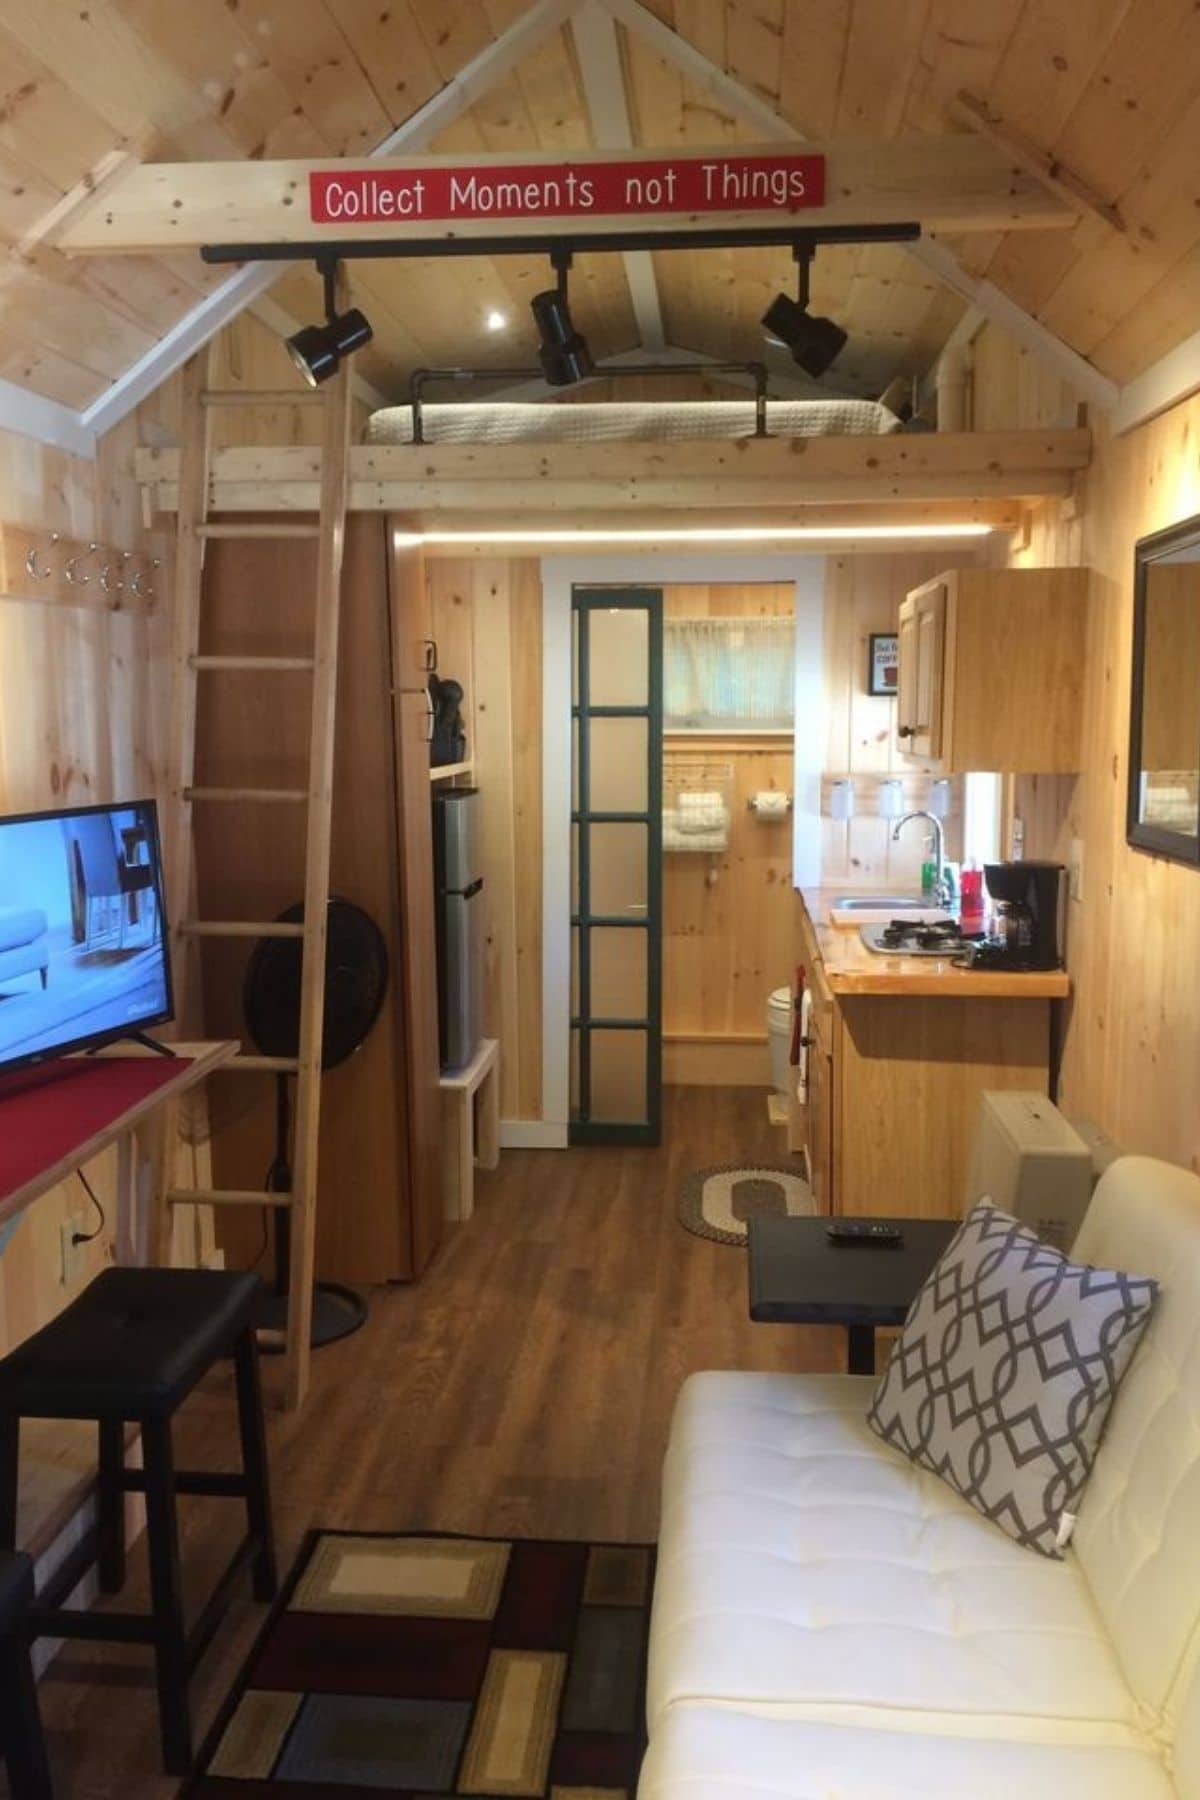 entry to tiny home with white sofa on right and loft above kitchen